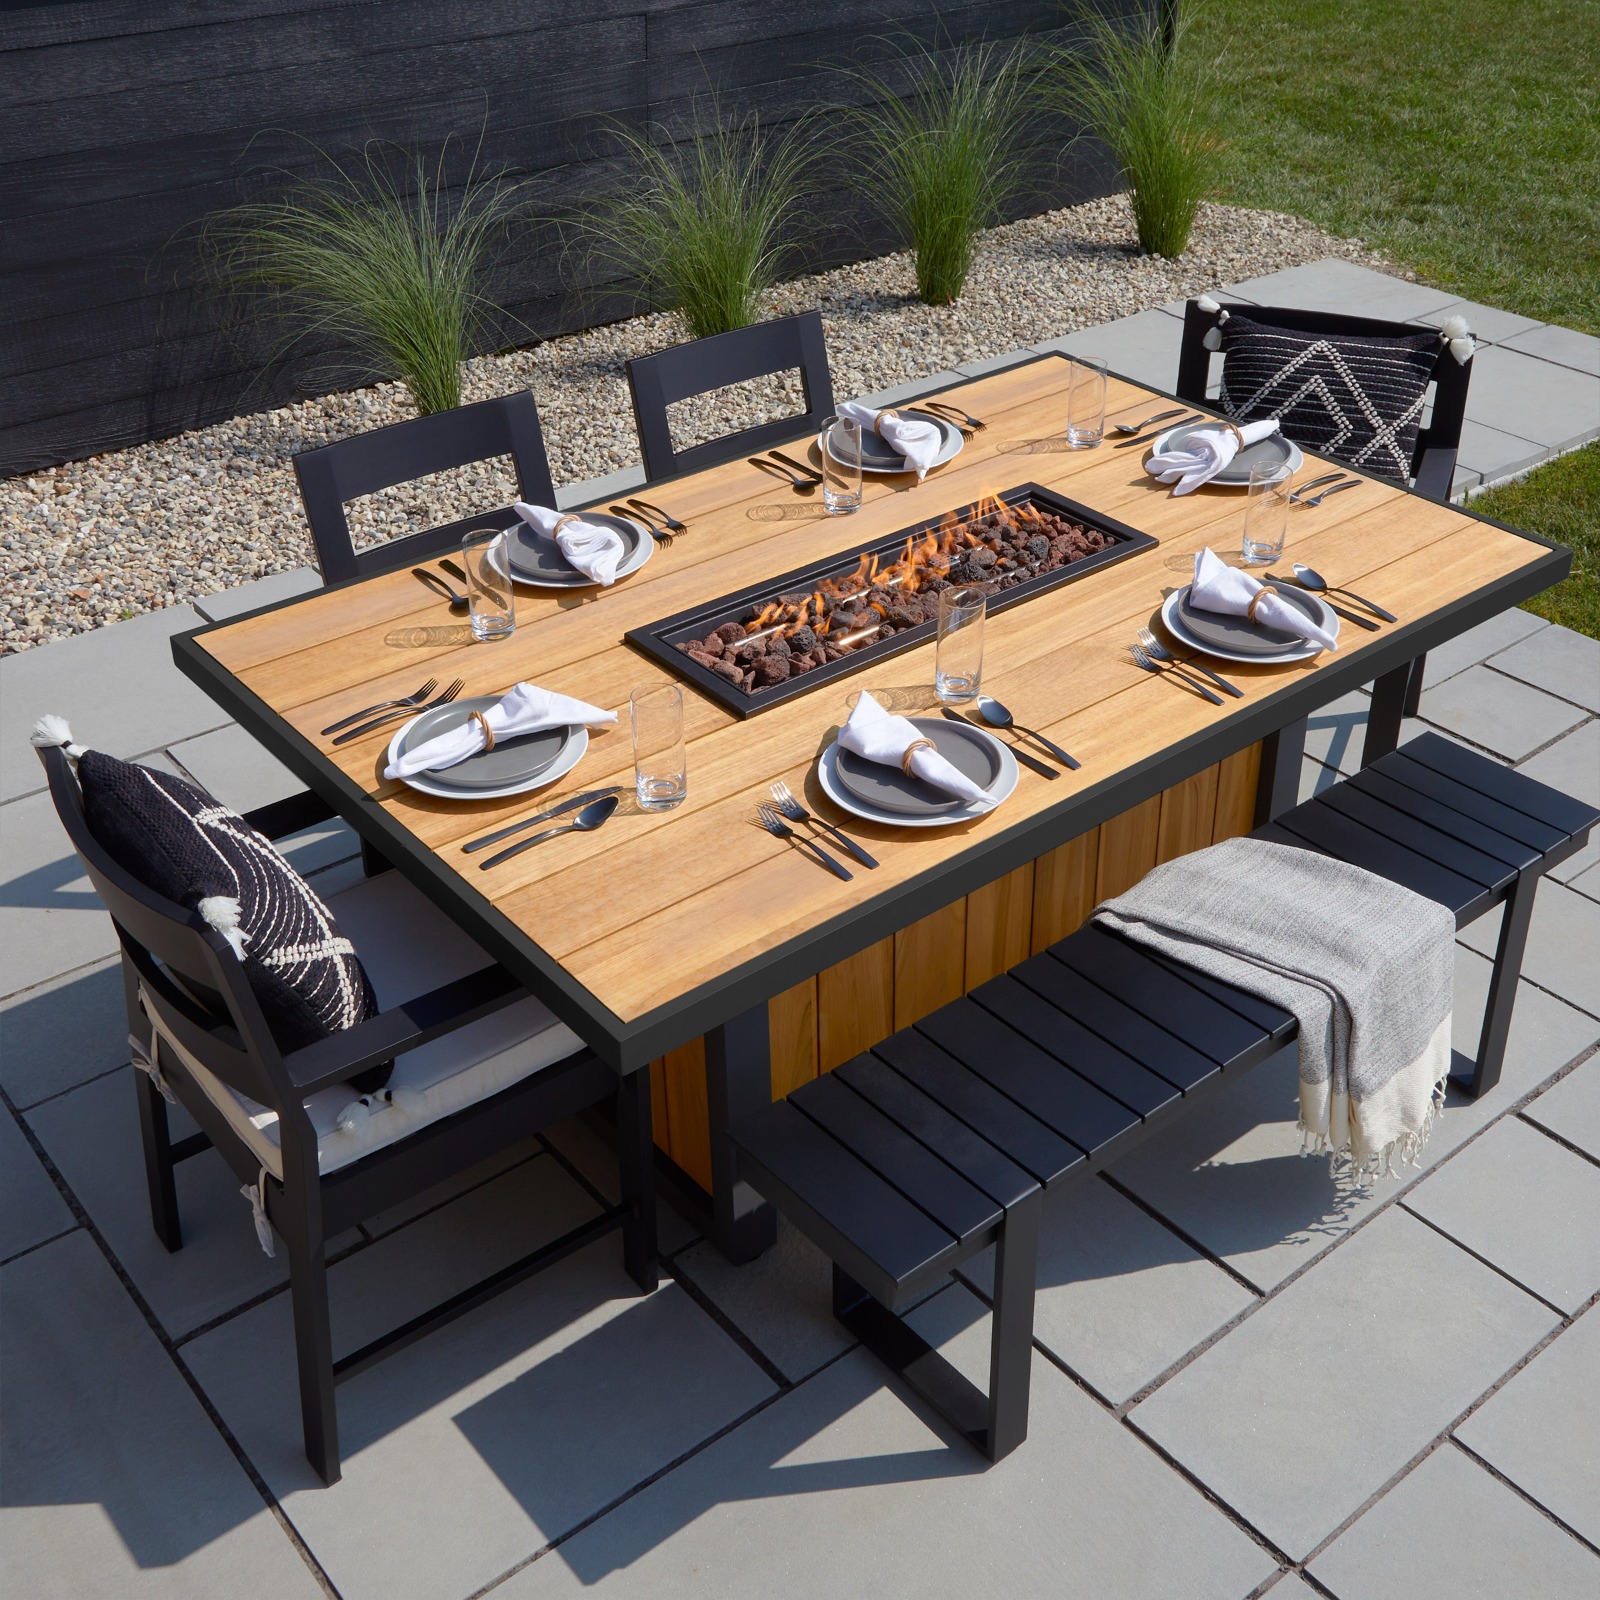 Bodhi 73" Outdoor Dining Table with Fire Pit and Hidden Propane Tank Fireplace Heater